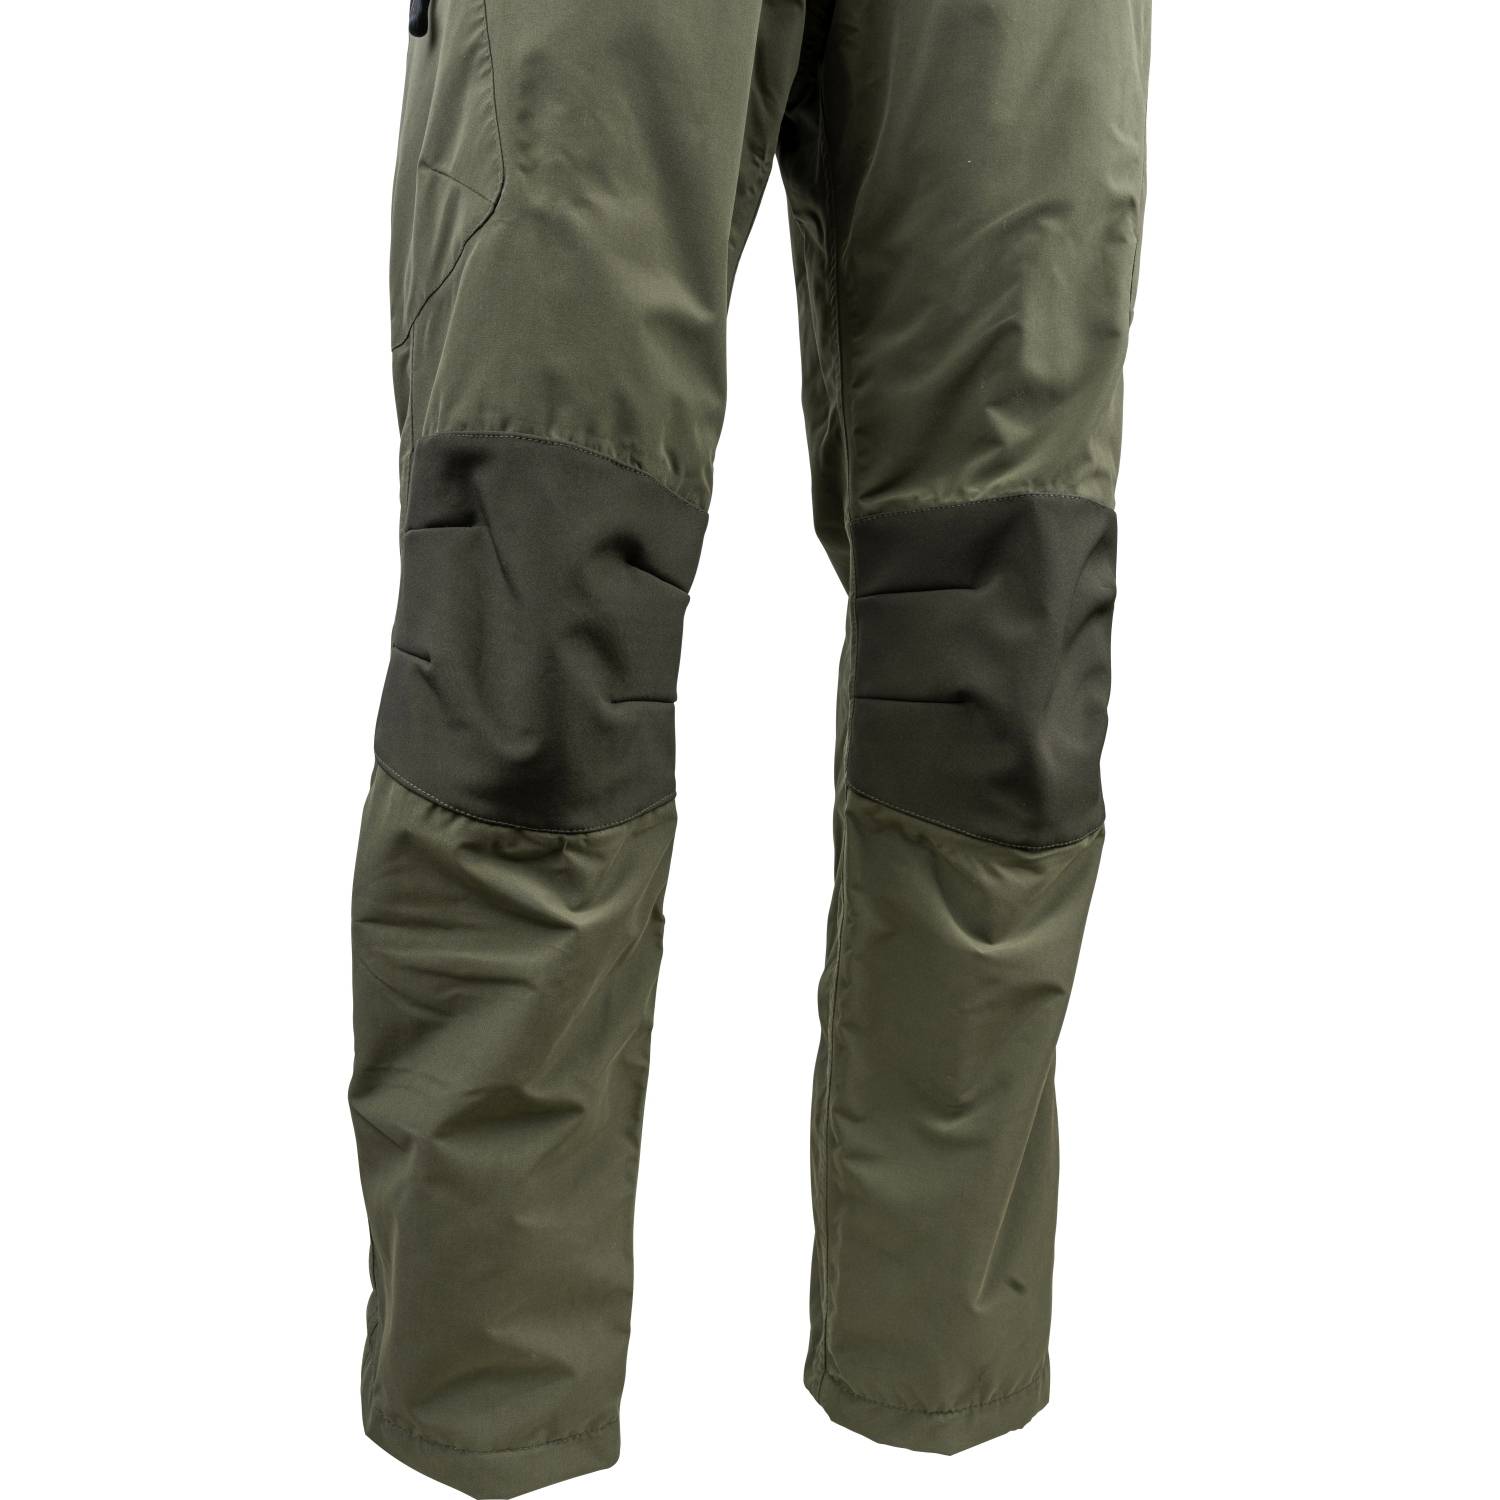 Speero Propus Trousers Green All Sizes 